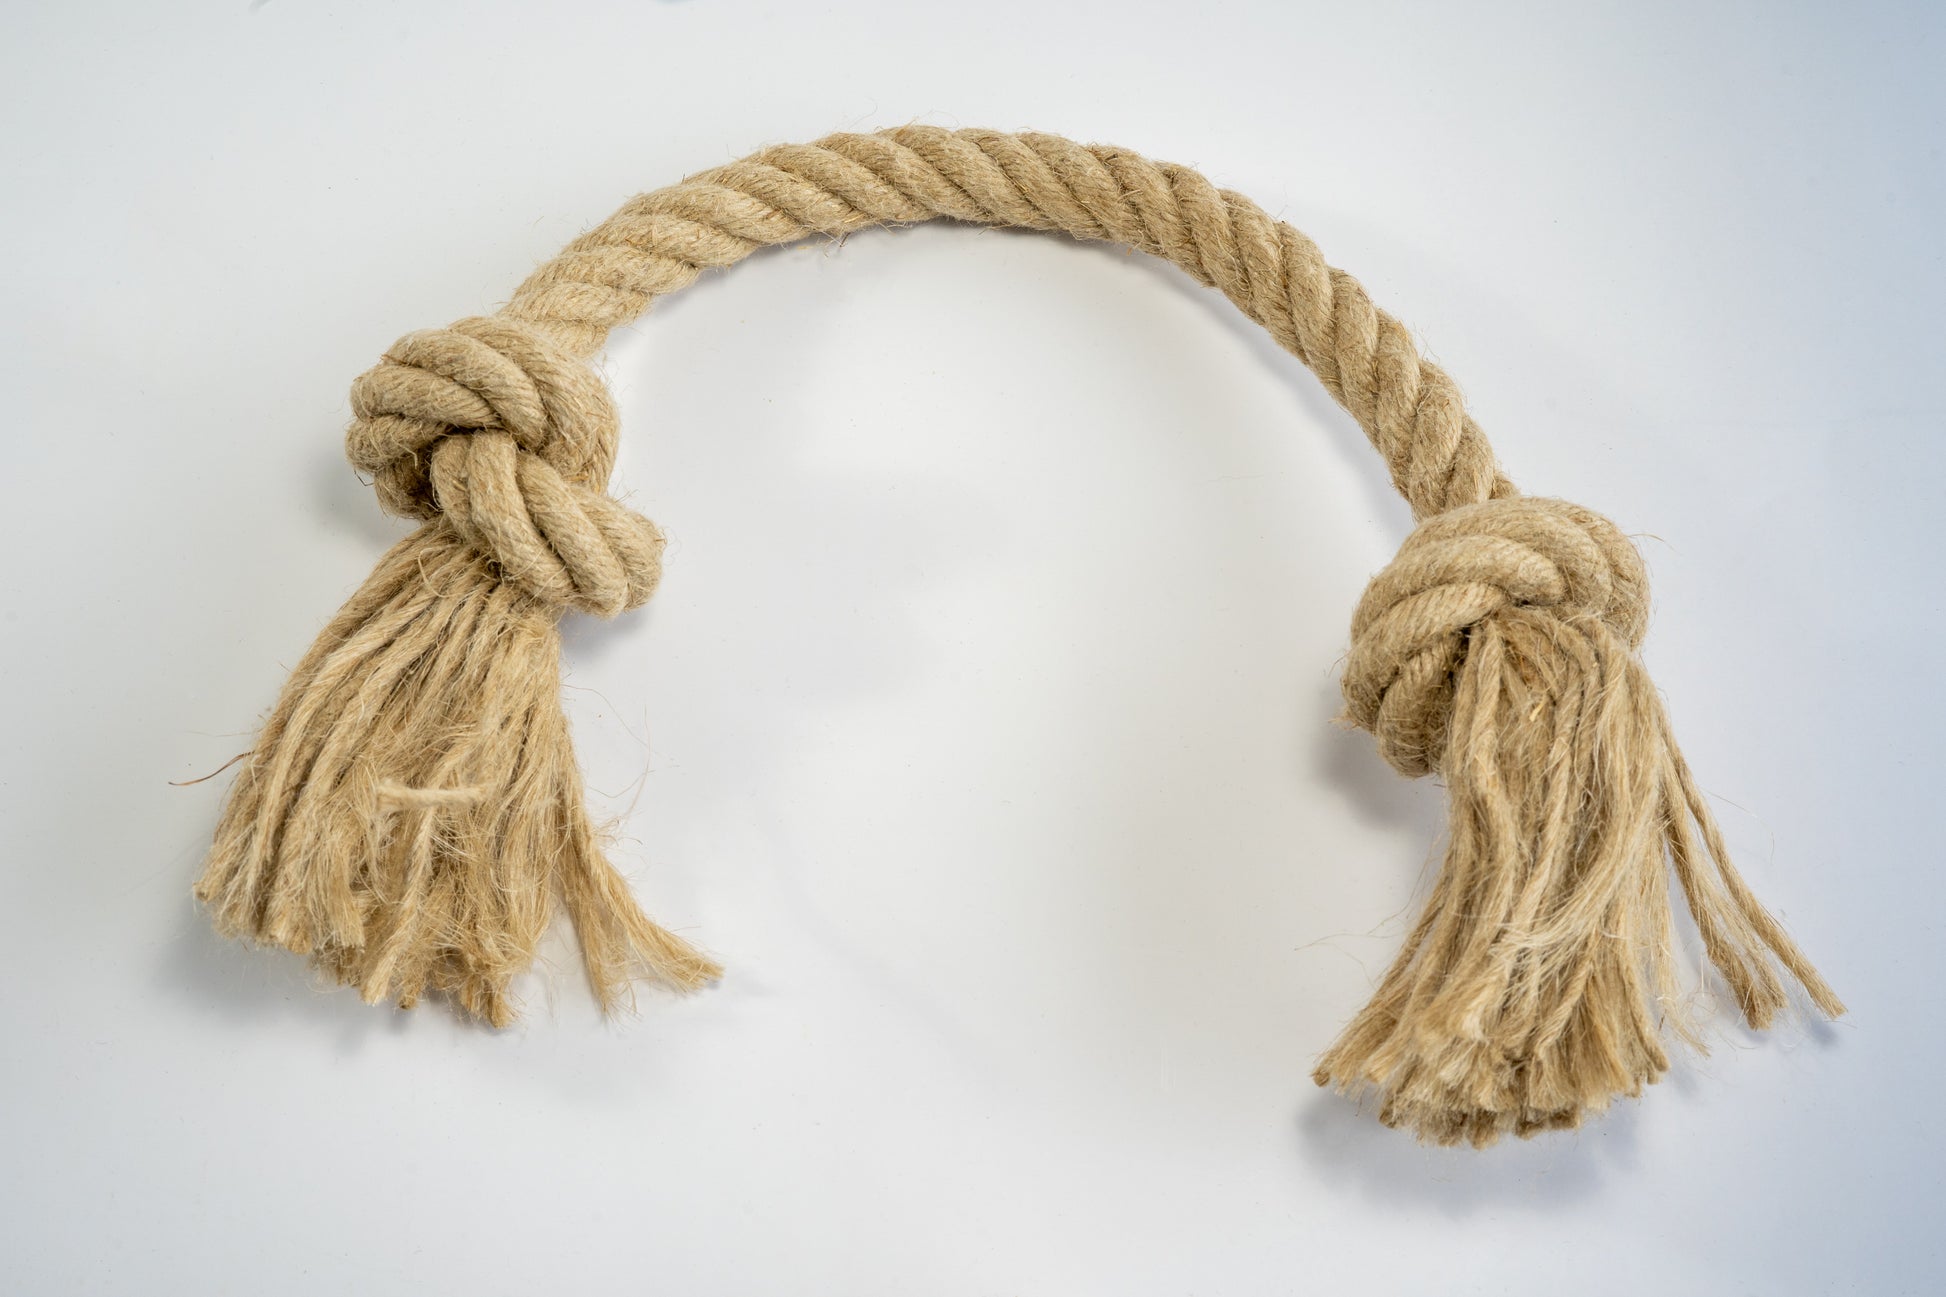 Large toy for dogs made from hemp rope with knots at the ends. | Jouet de grande taille pour chiens en corde de chanvre avec noeuds aux bouts.